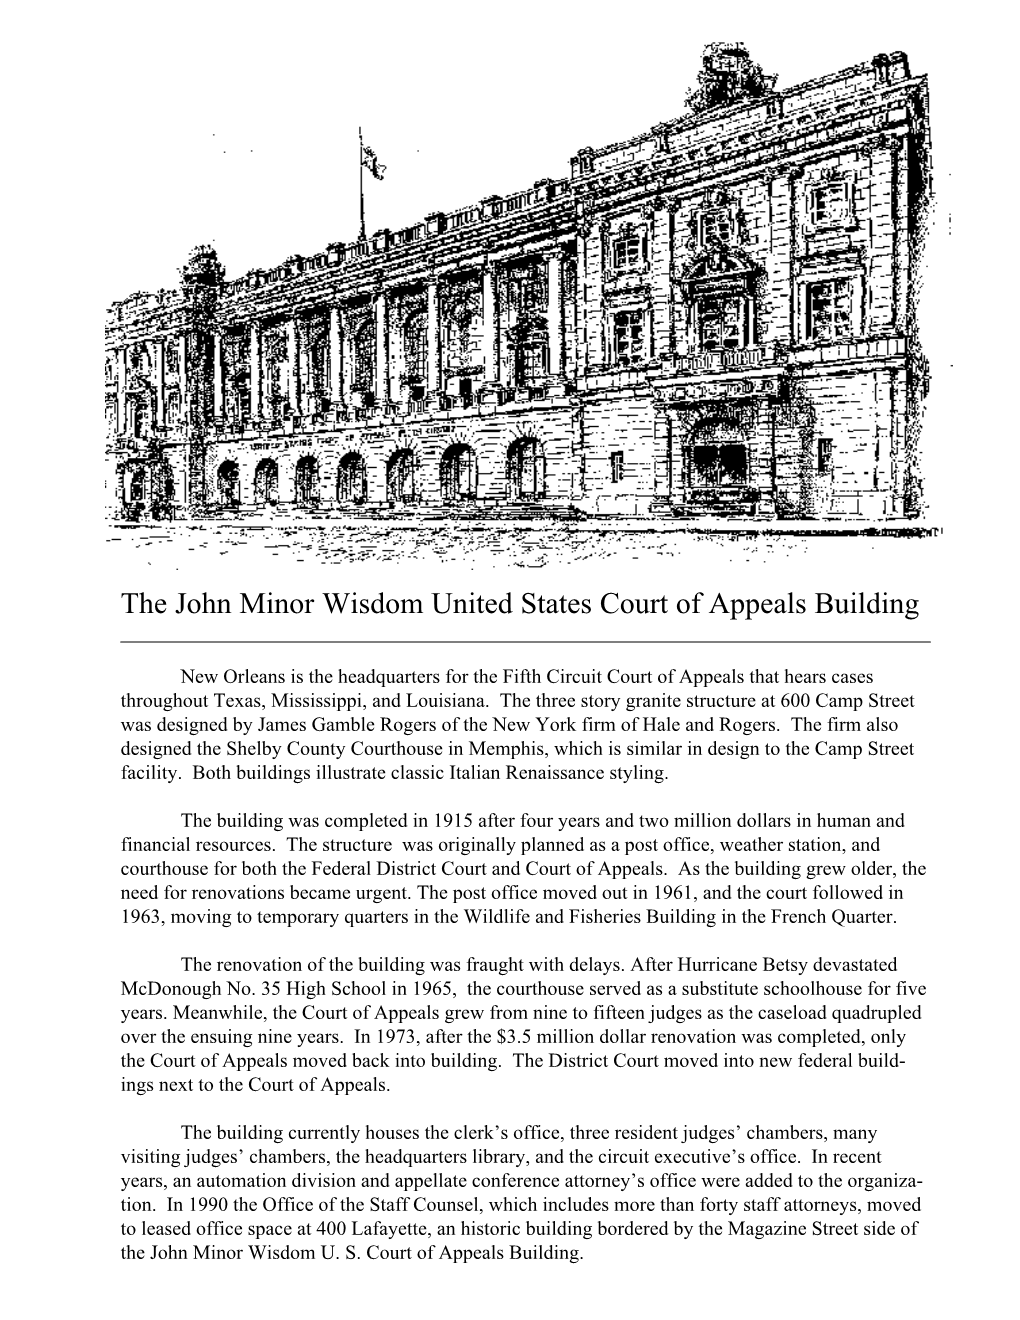 The John Minor Wisdom United States Court of Appeals Building